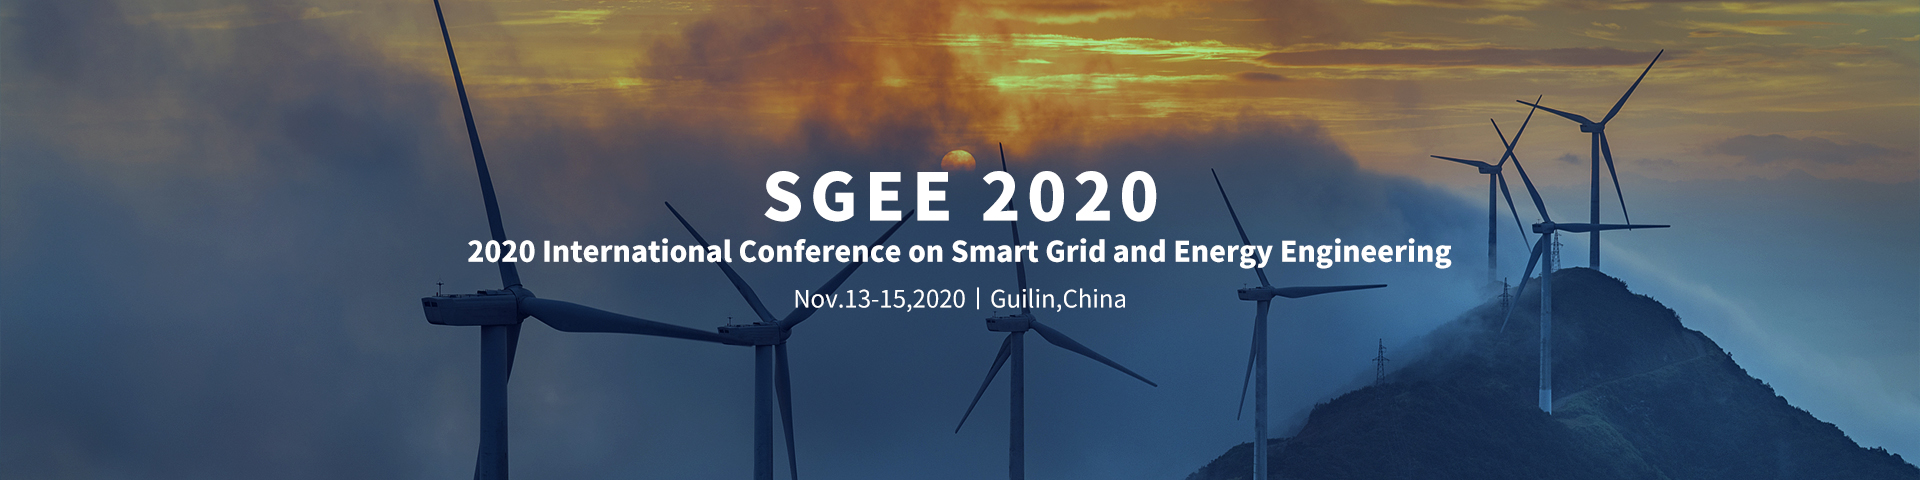 2020 International Conference on Smart Grid and Energy Engineering (SGEE 2020), Guilin, Guangxi, China